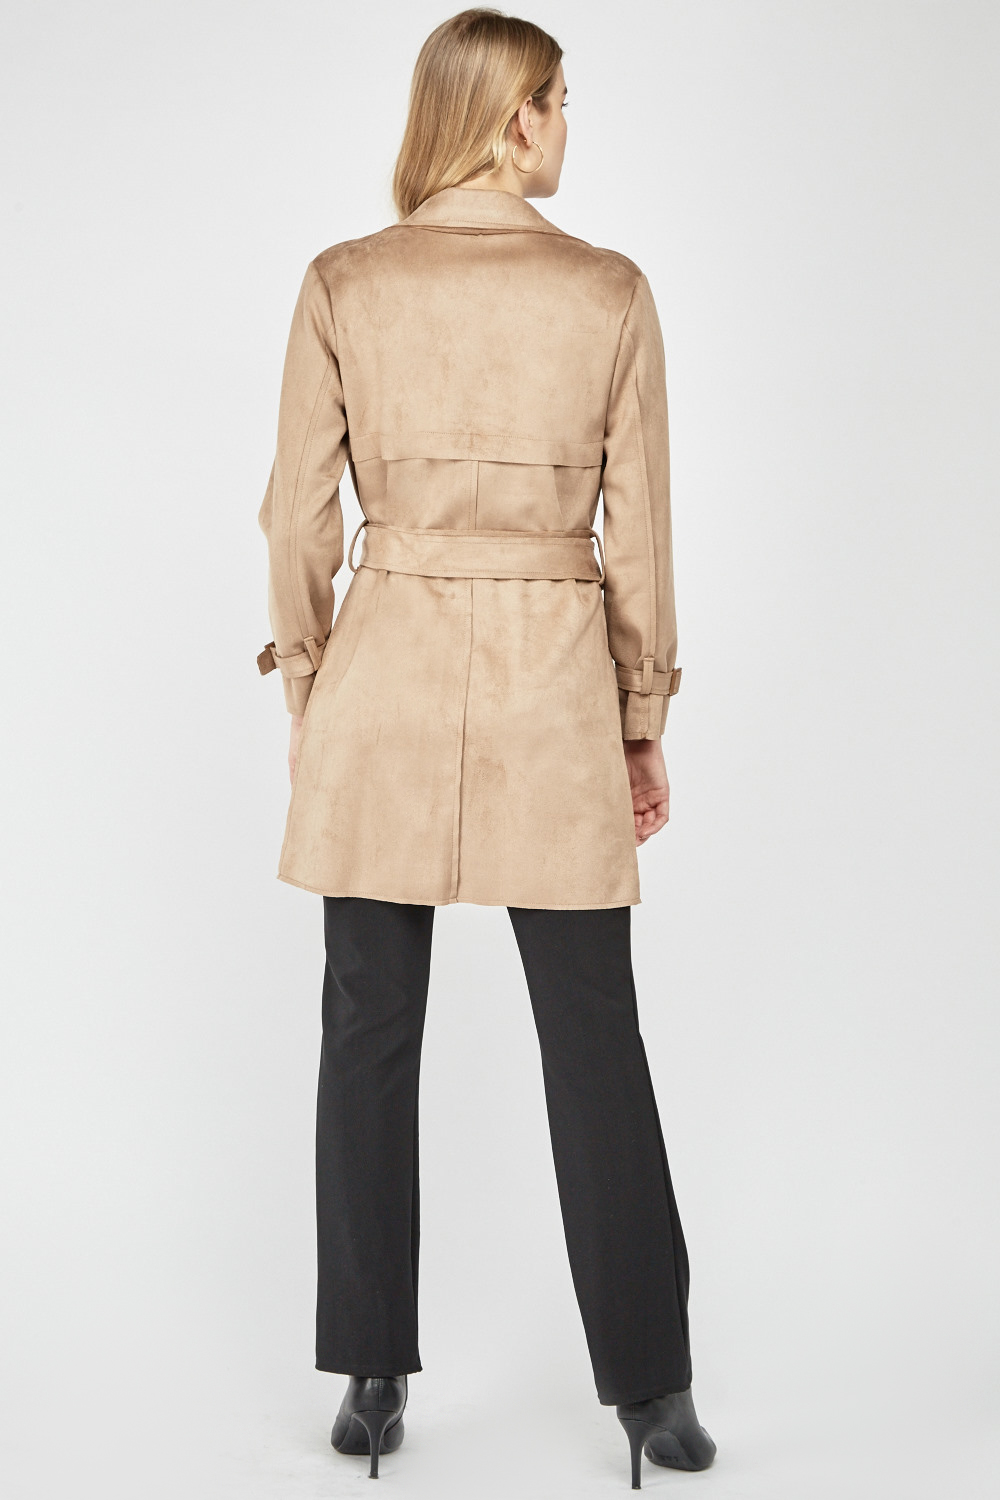 Beige Faux Suede Trench Coat - Just $7